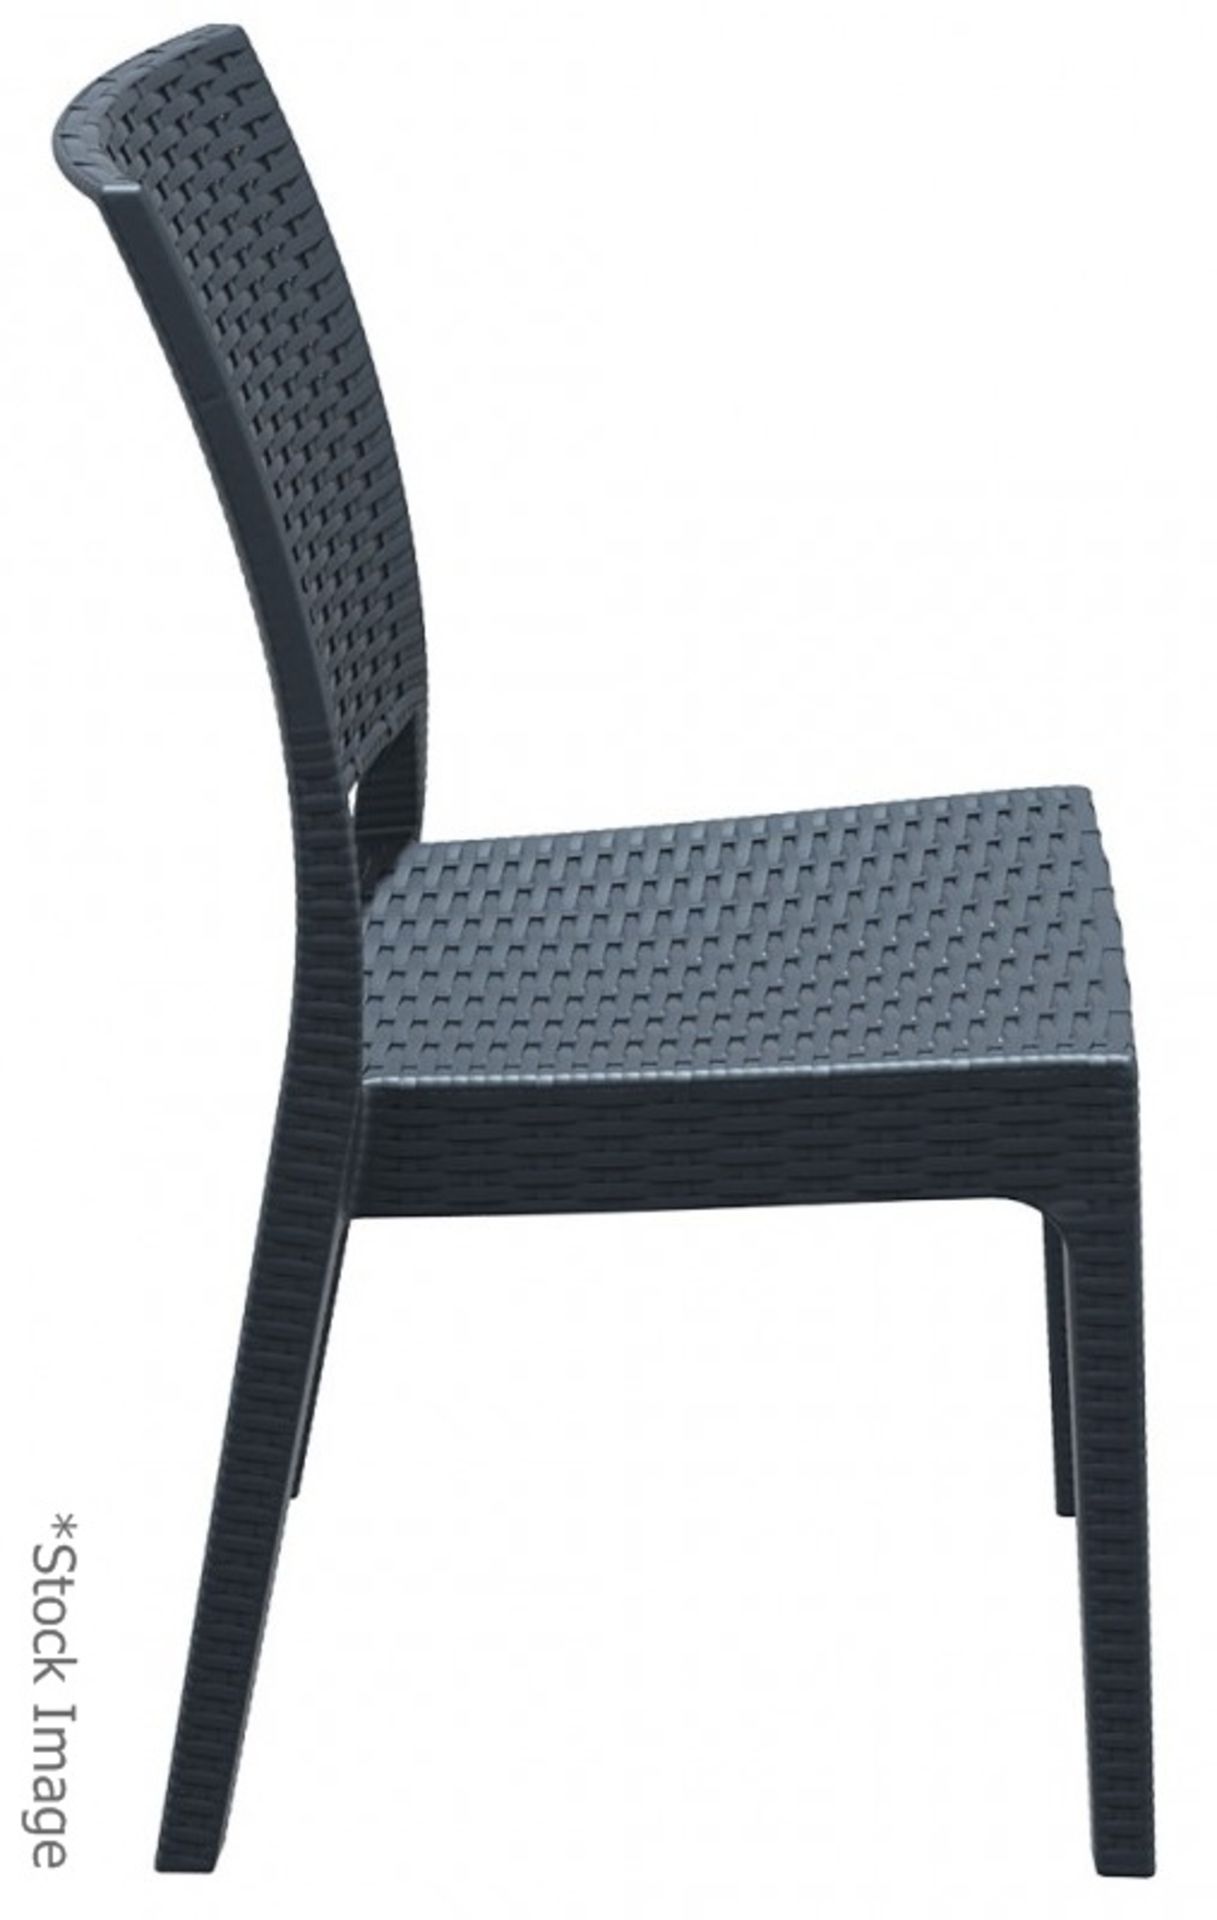 4 x SIESTA EXCLUSIVE 'Florida' Commercial Stackable Rattan-style Chairs In Dark Grey - RRP £320.00 - Image 11 of 13